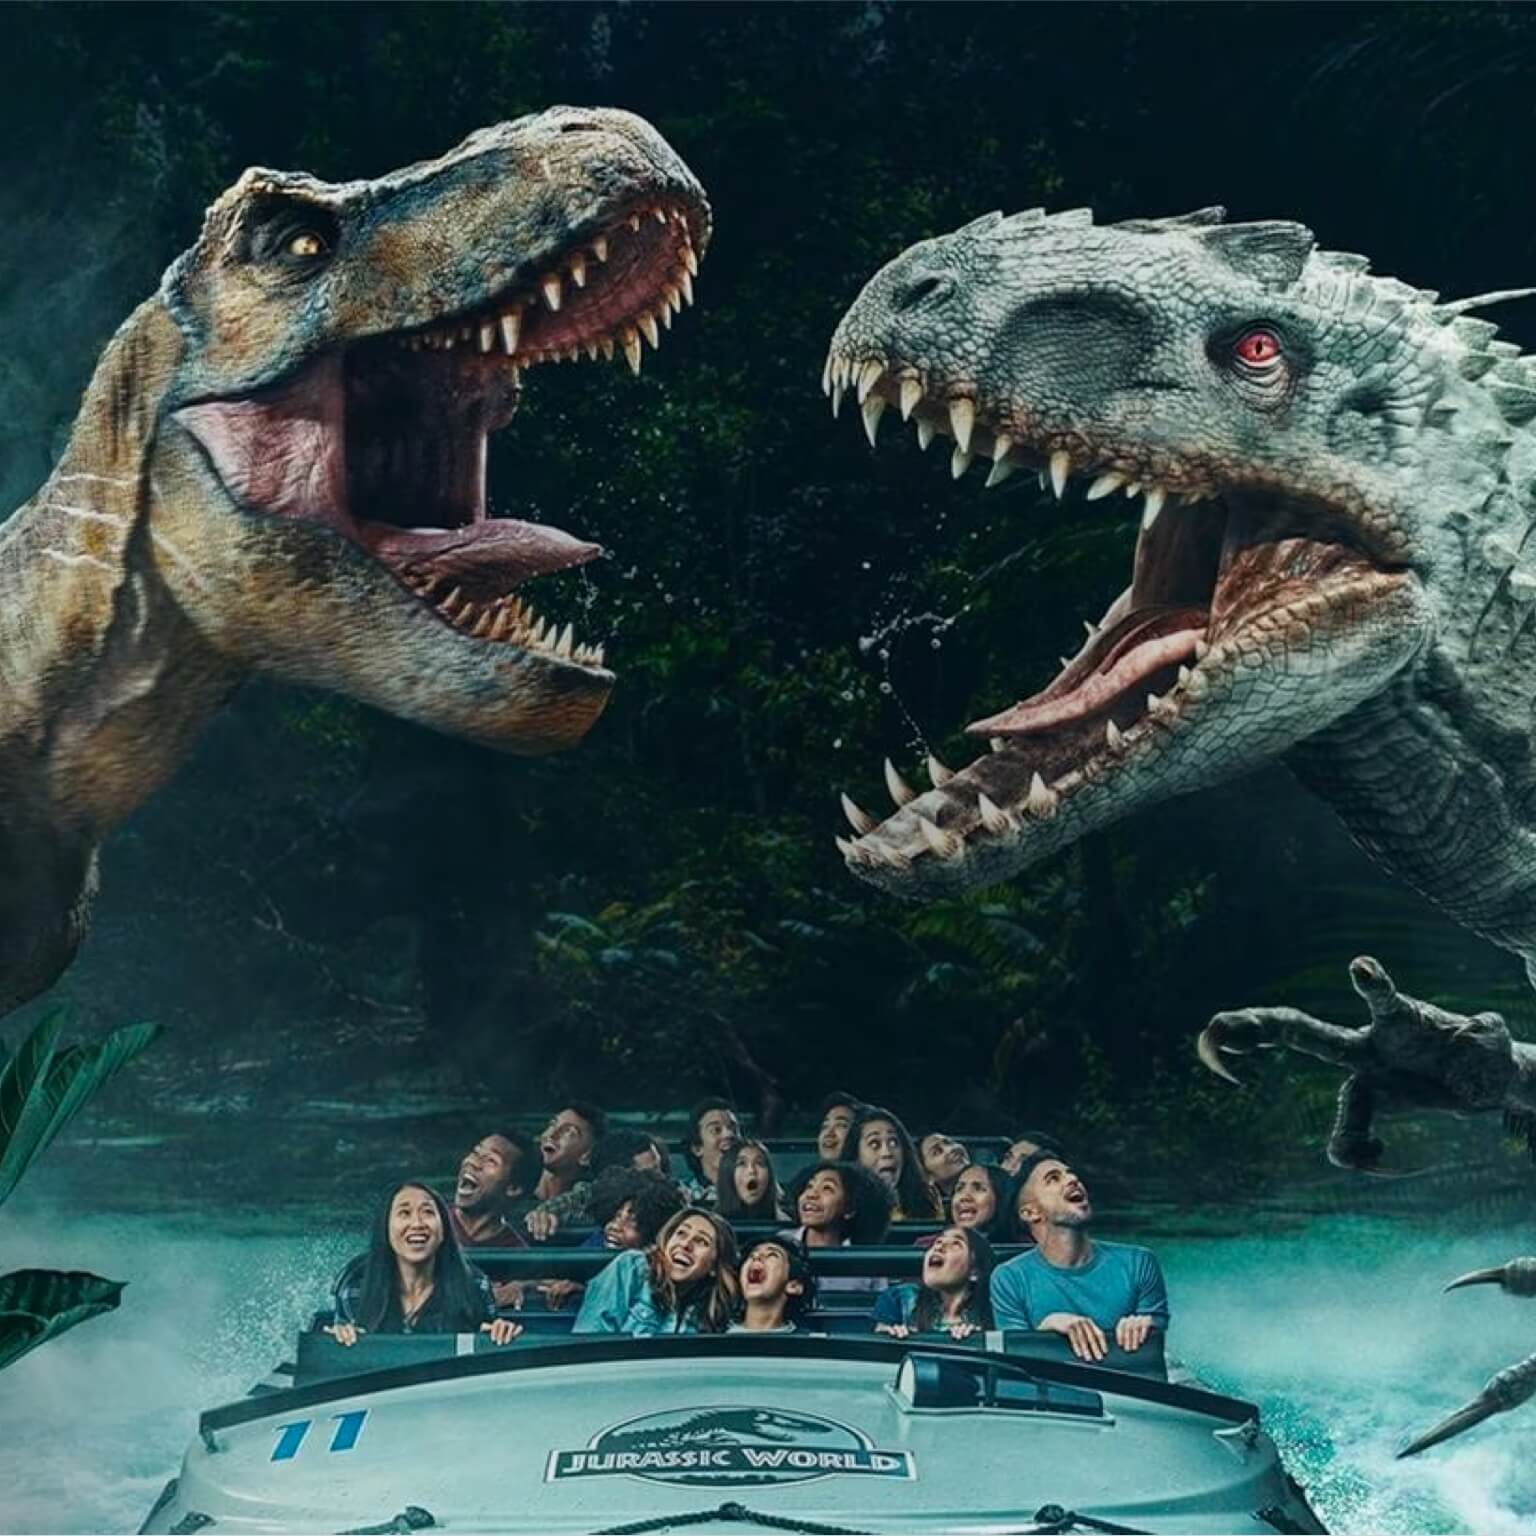 Composite of T. rex and Indominus rex getting ready to battle over a riders in Jurassic World - The Ride.